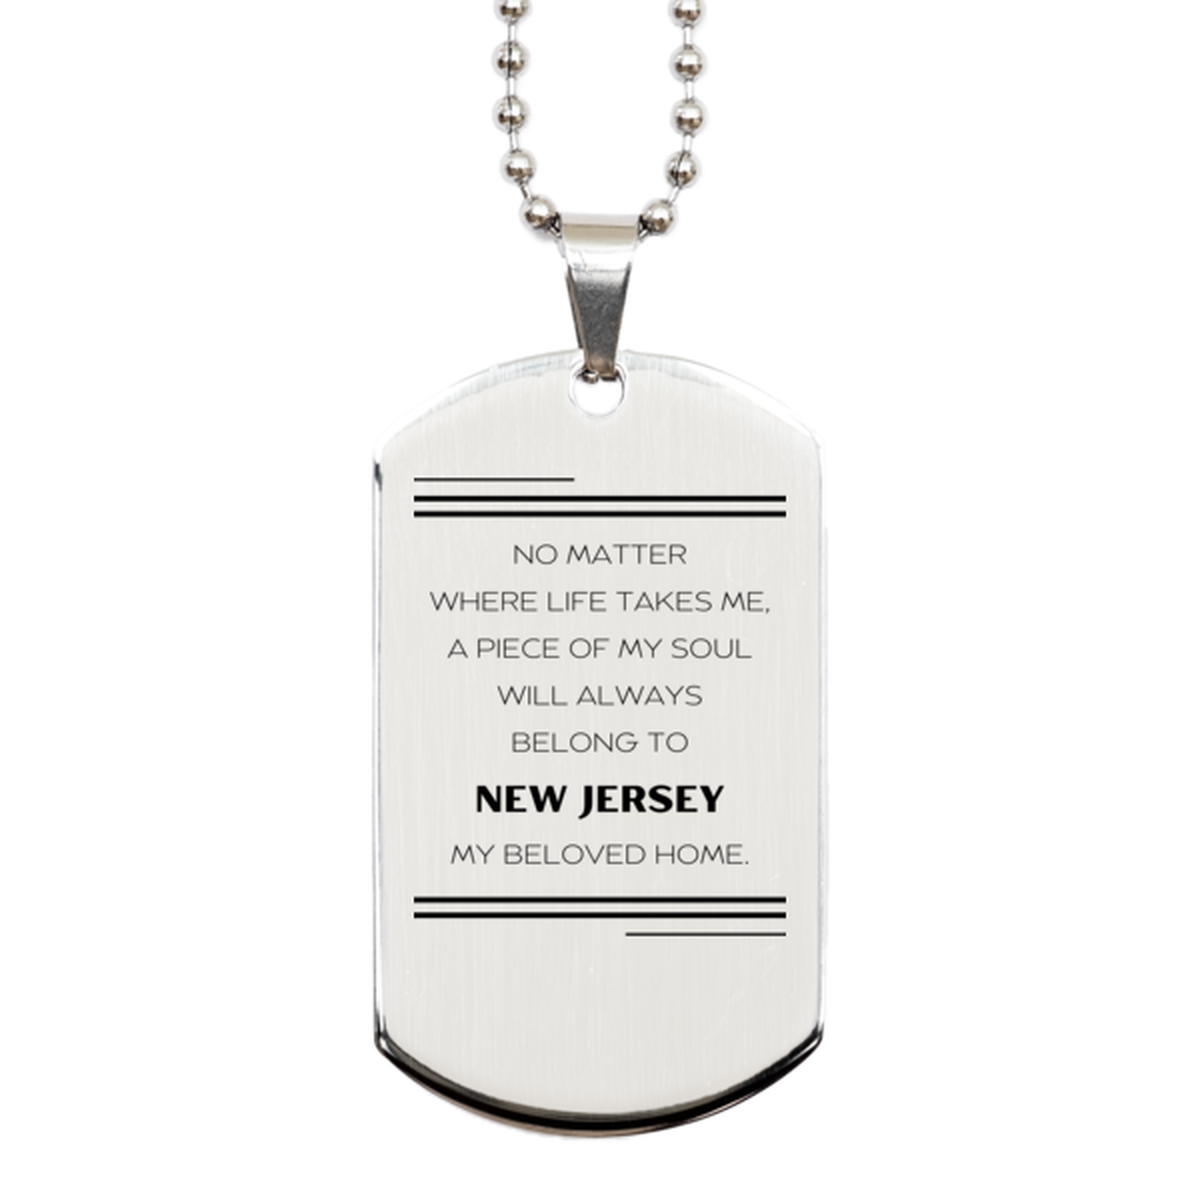 Love New Jersey State Gifts, My soul will always belong to New Jersey, Proud Silver Dog Tag, Birthday Unique Gifts For New Jersey Men, Women, Friends